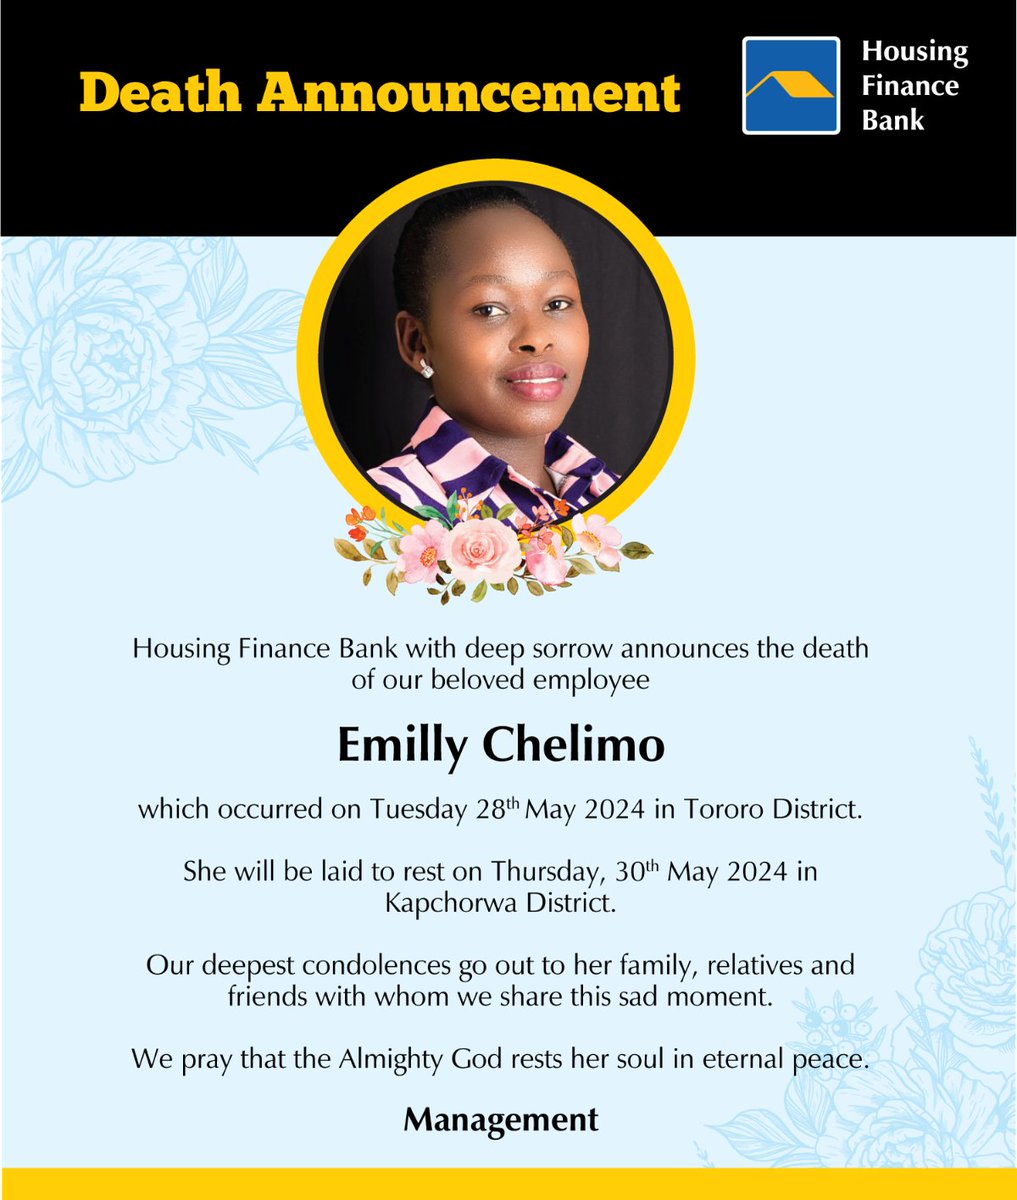 The Board, Management and entire Housing Finance Bank fraternity with great sorrow announce the passing of our dear friend and member of staff, Emilly Chelimo that occurred on 28th May 2024 in Tororo District. Her body will be laid to rest today, 30th May 2024 in Kapchorwa